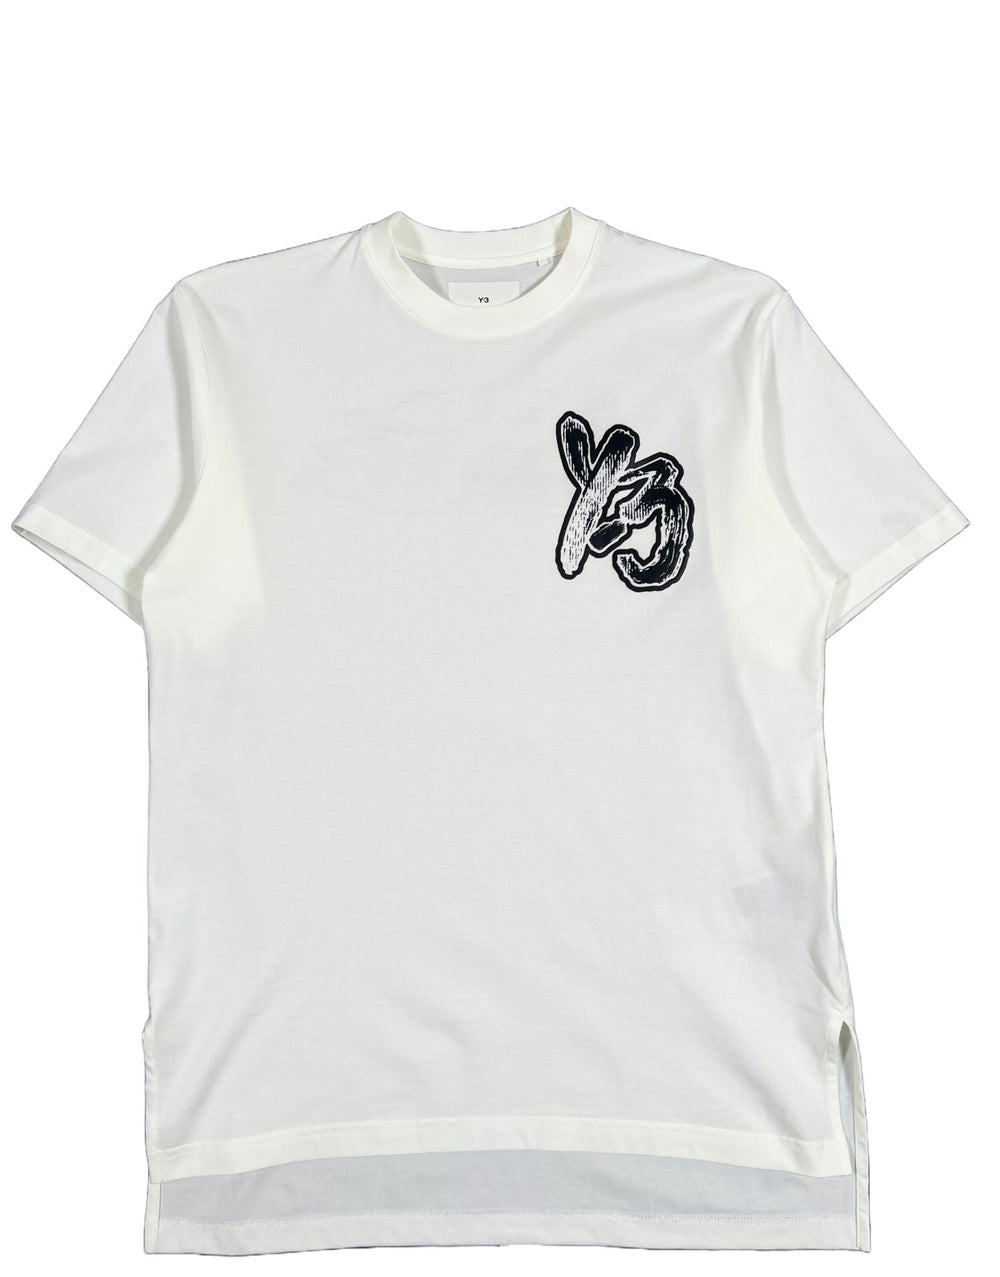 A Y-3 IM1791 BRUSH GFX SS TEE OFF WHITE with a black rubber logo print on it.